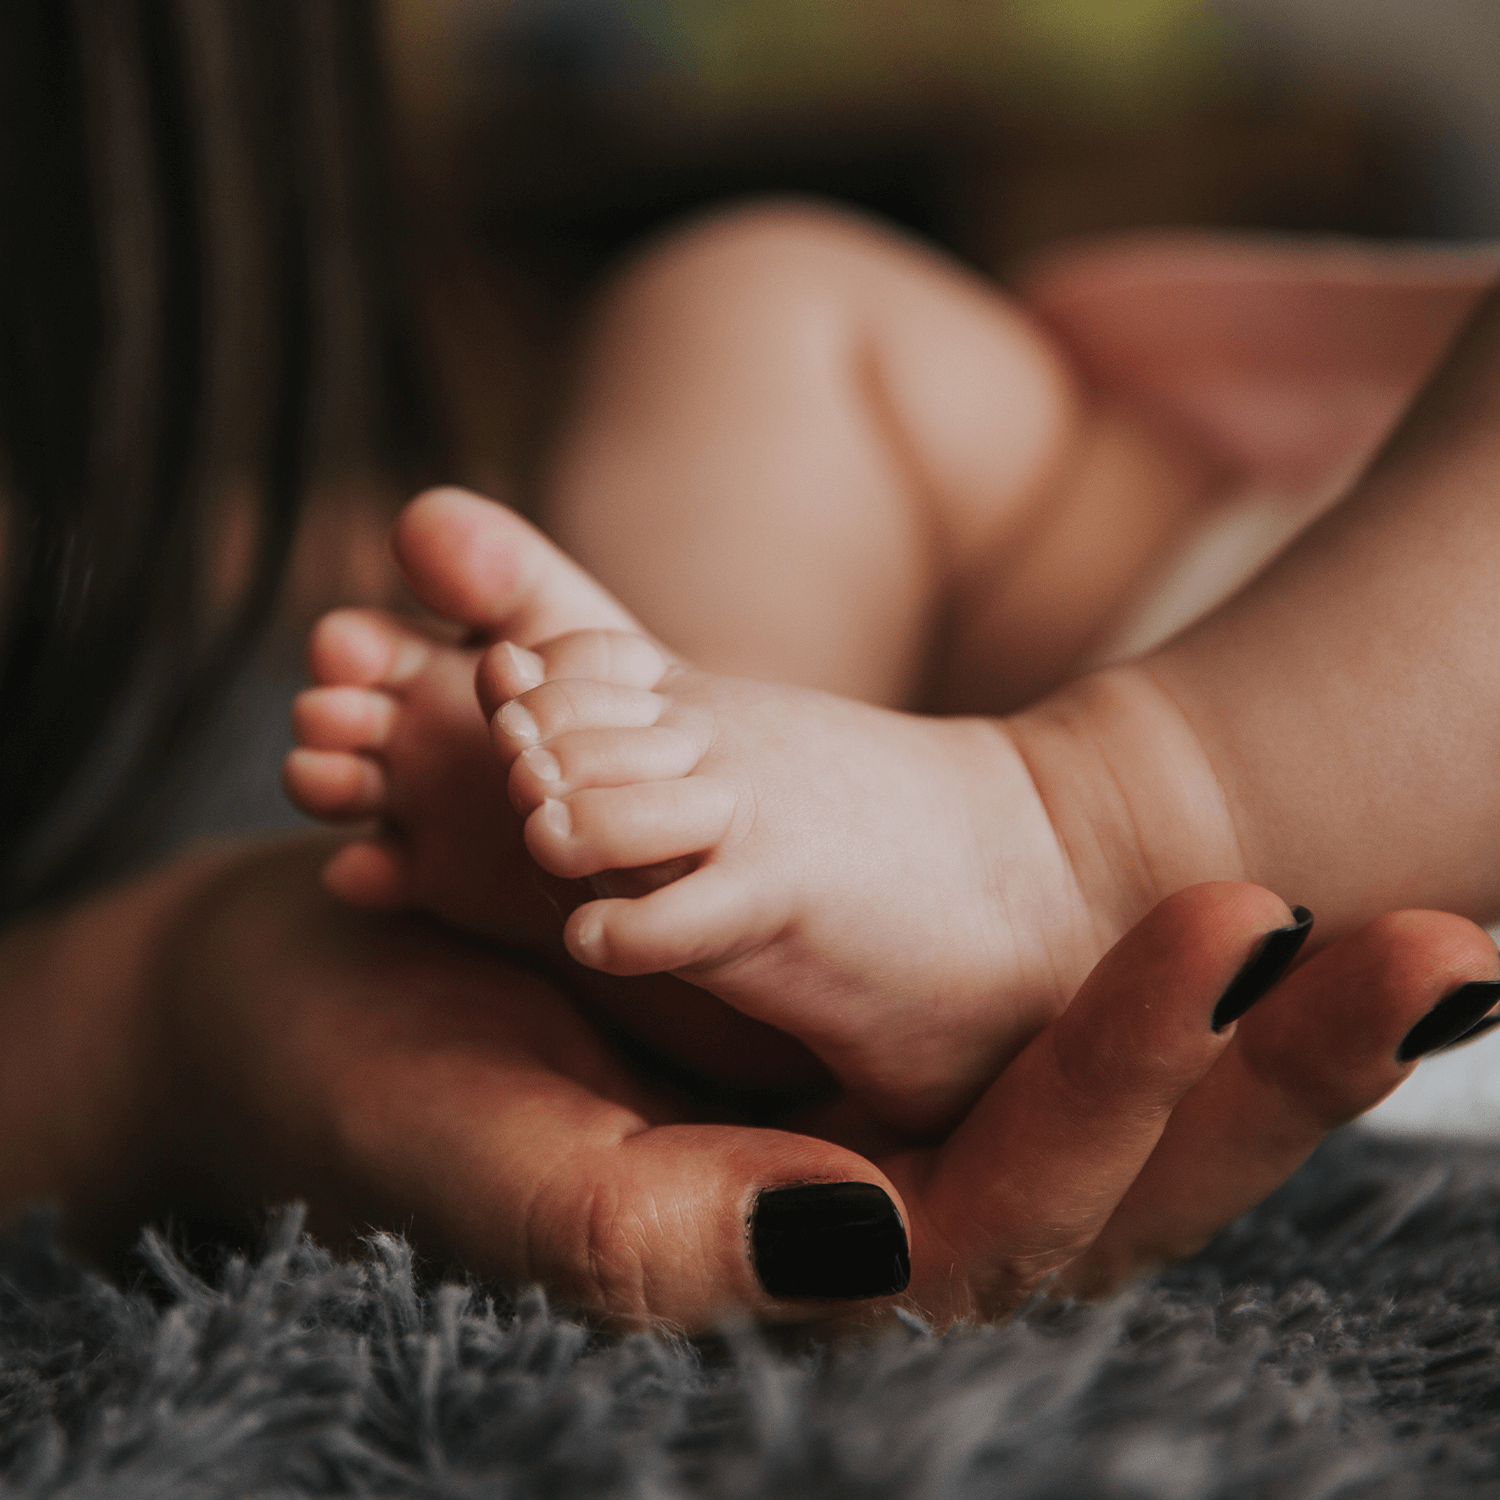 woman holding babies foot